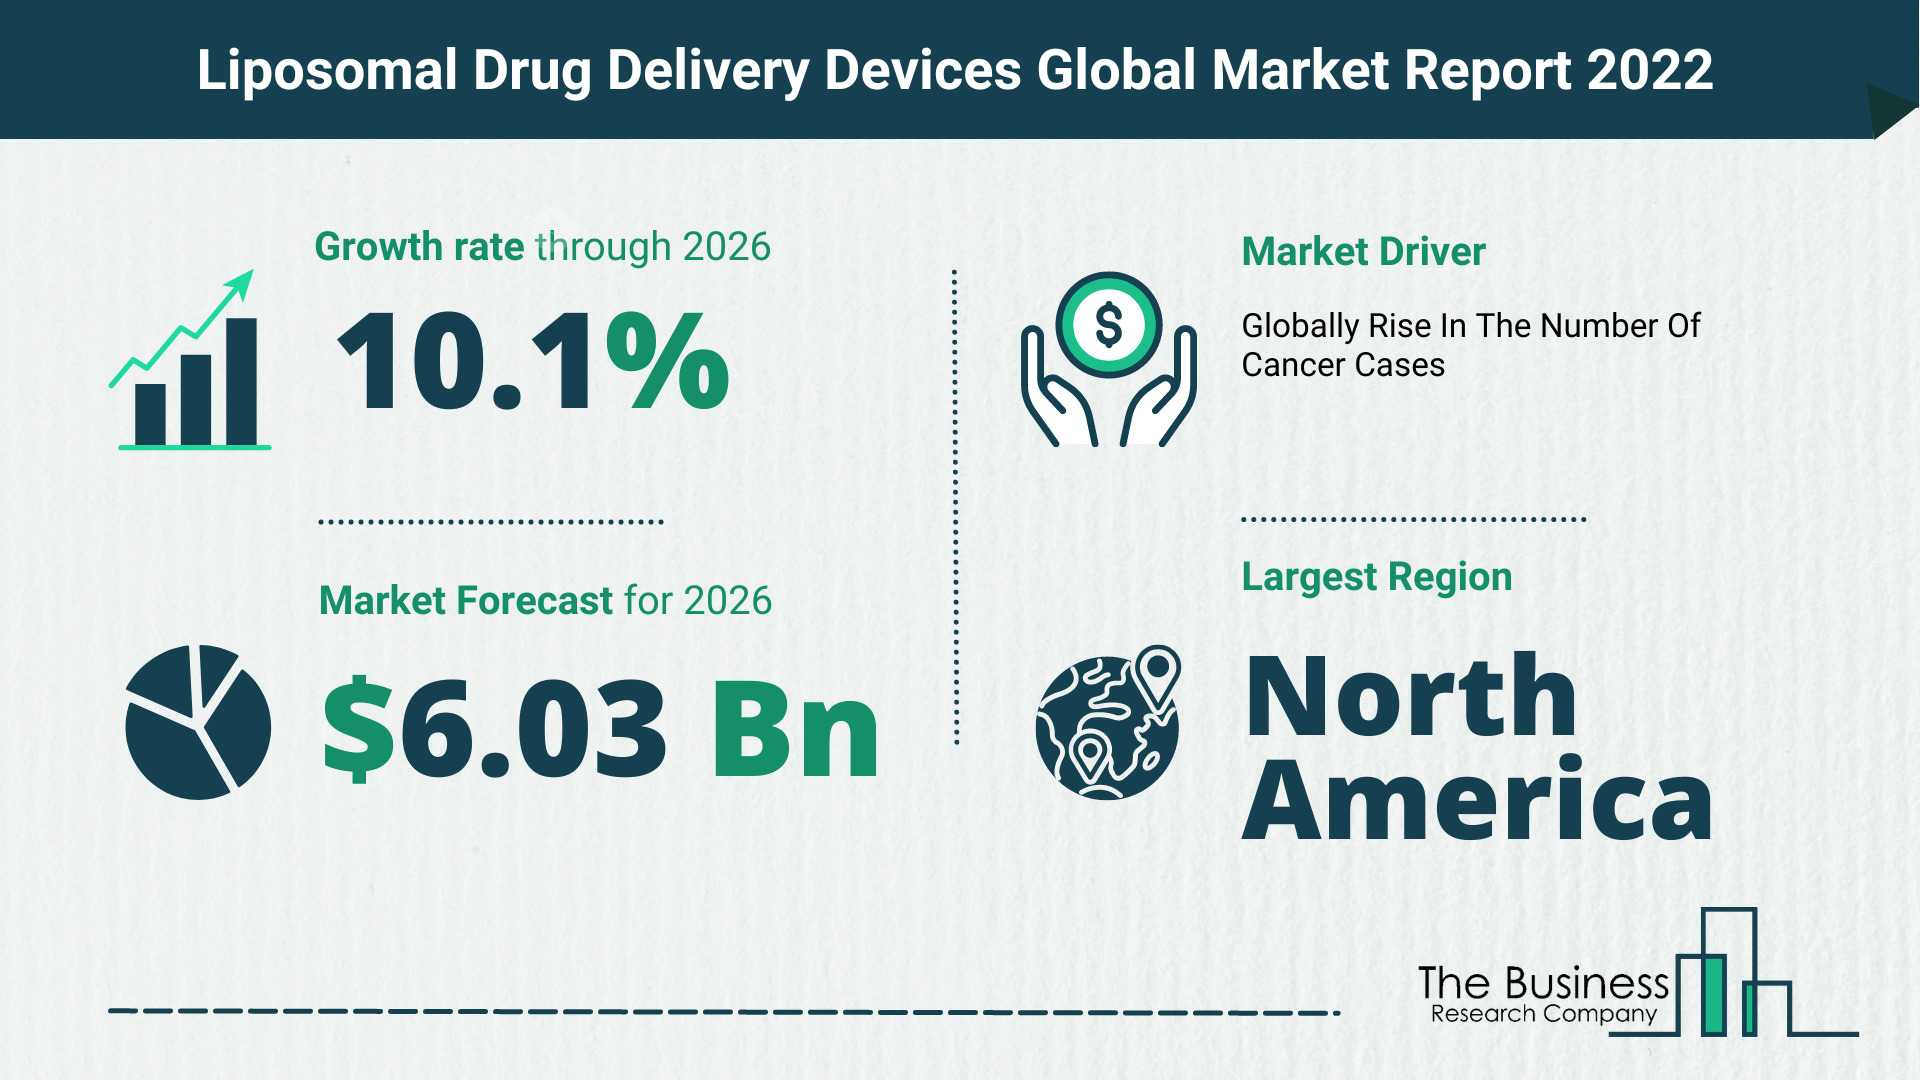 How Will The Liposomal Drug Delivery Devices Market Grow In 2022?